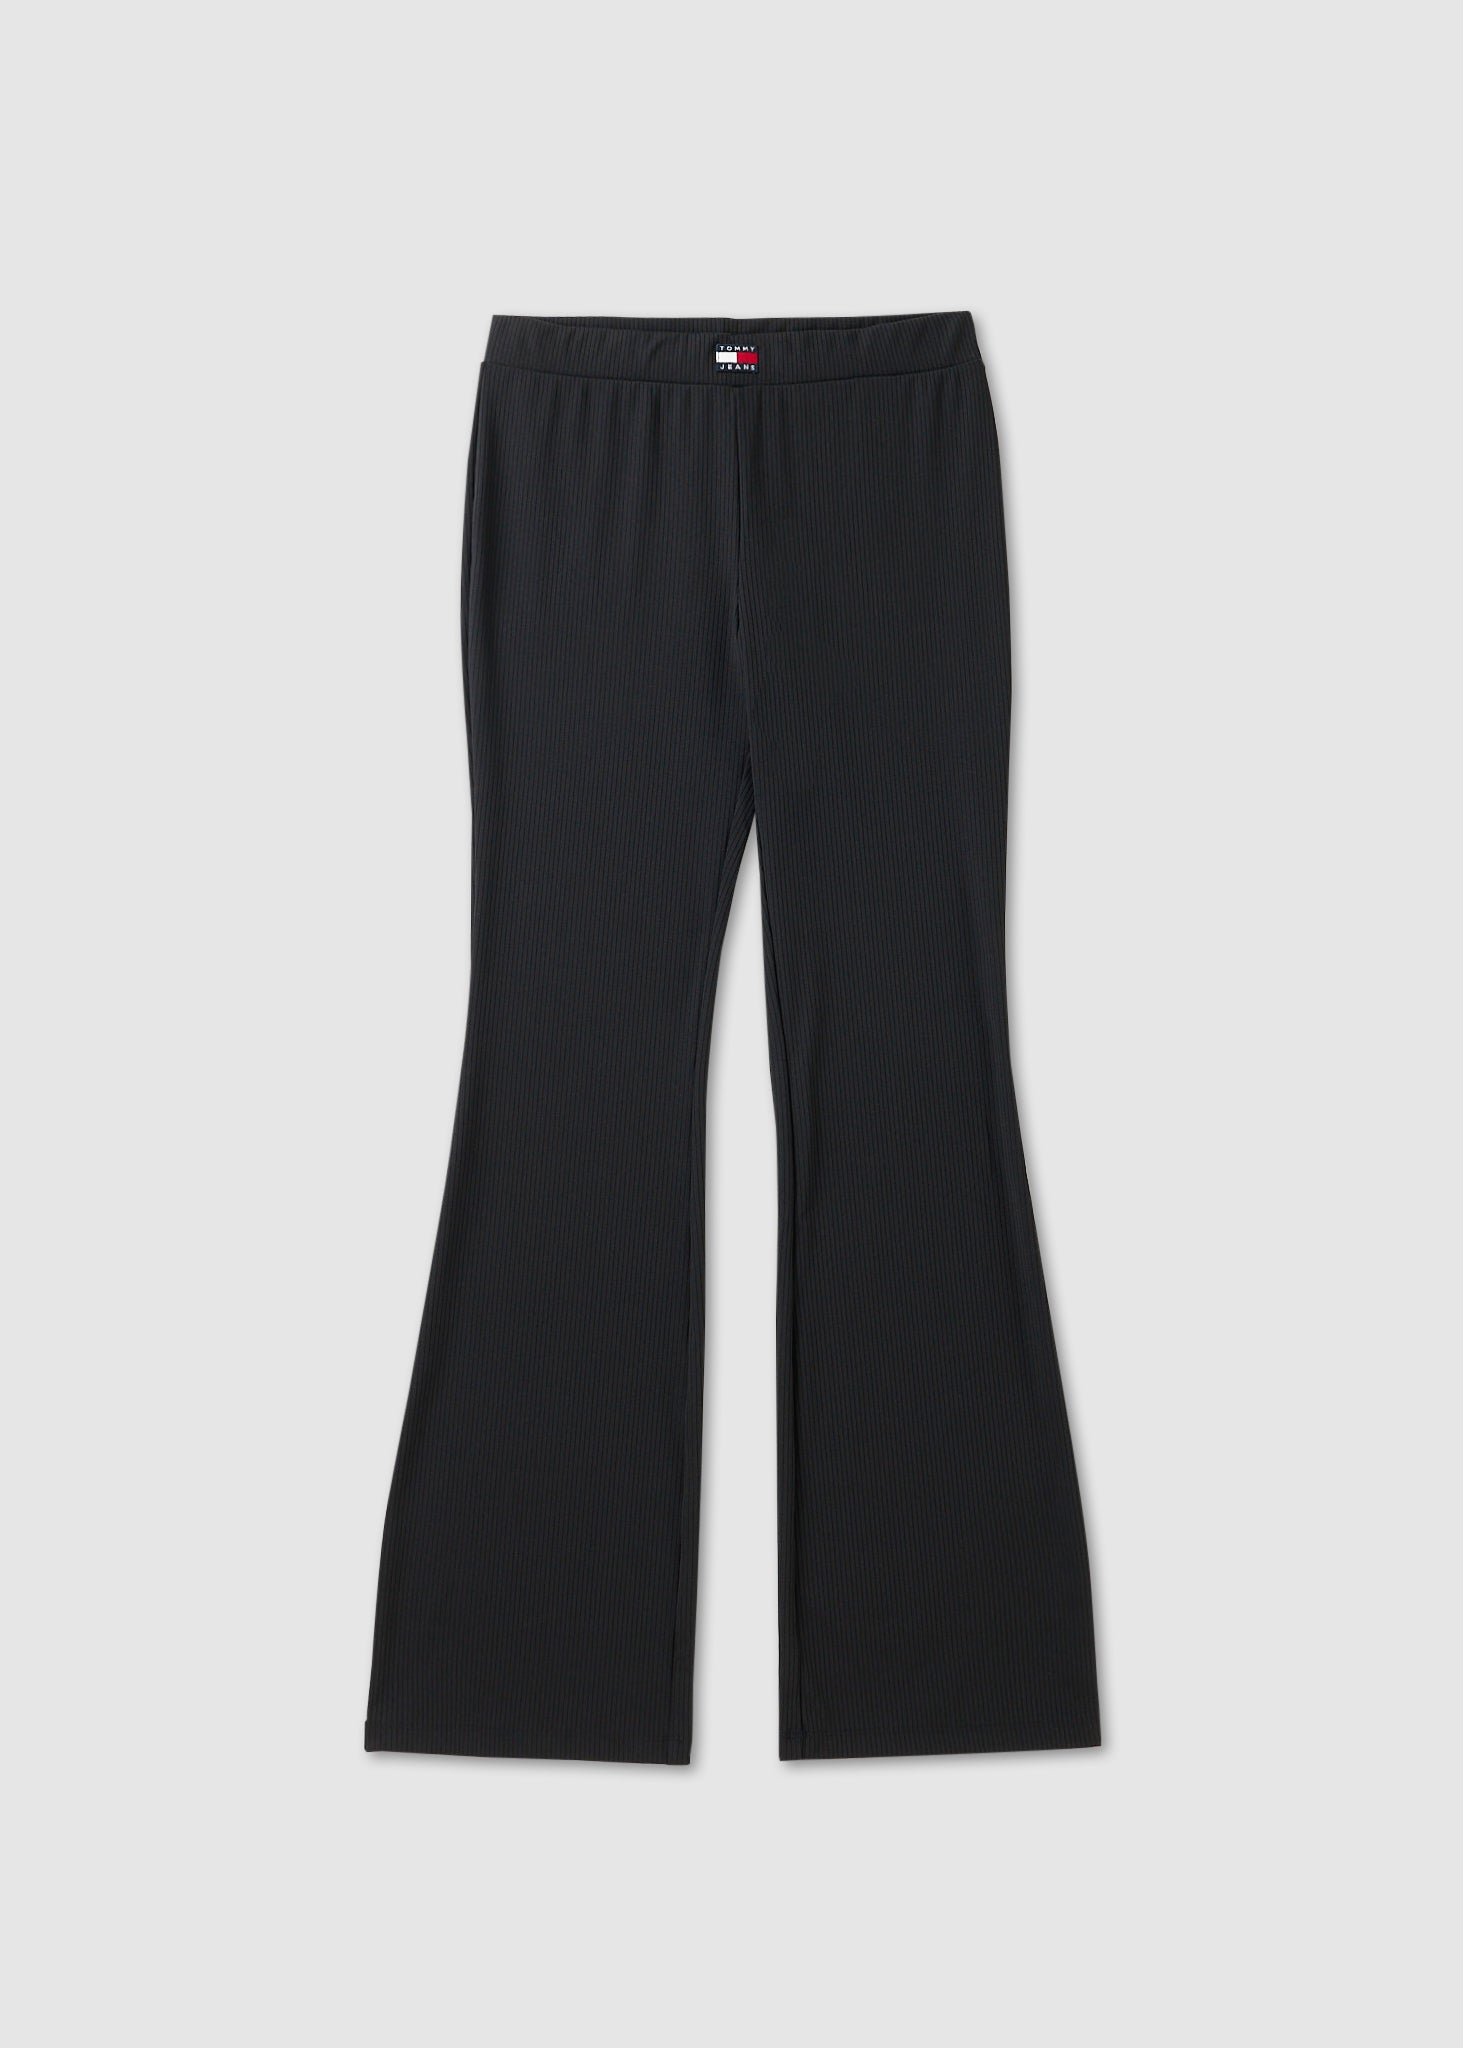 Image of Tommy Hilfiger Womens Low Rise Flared Leggings In Black